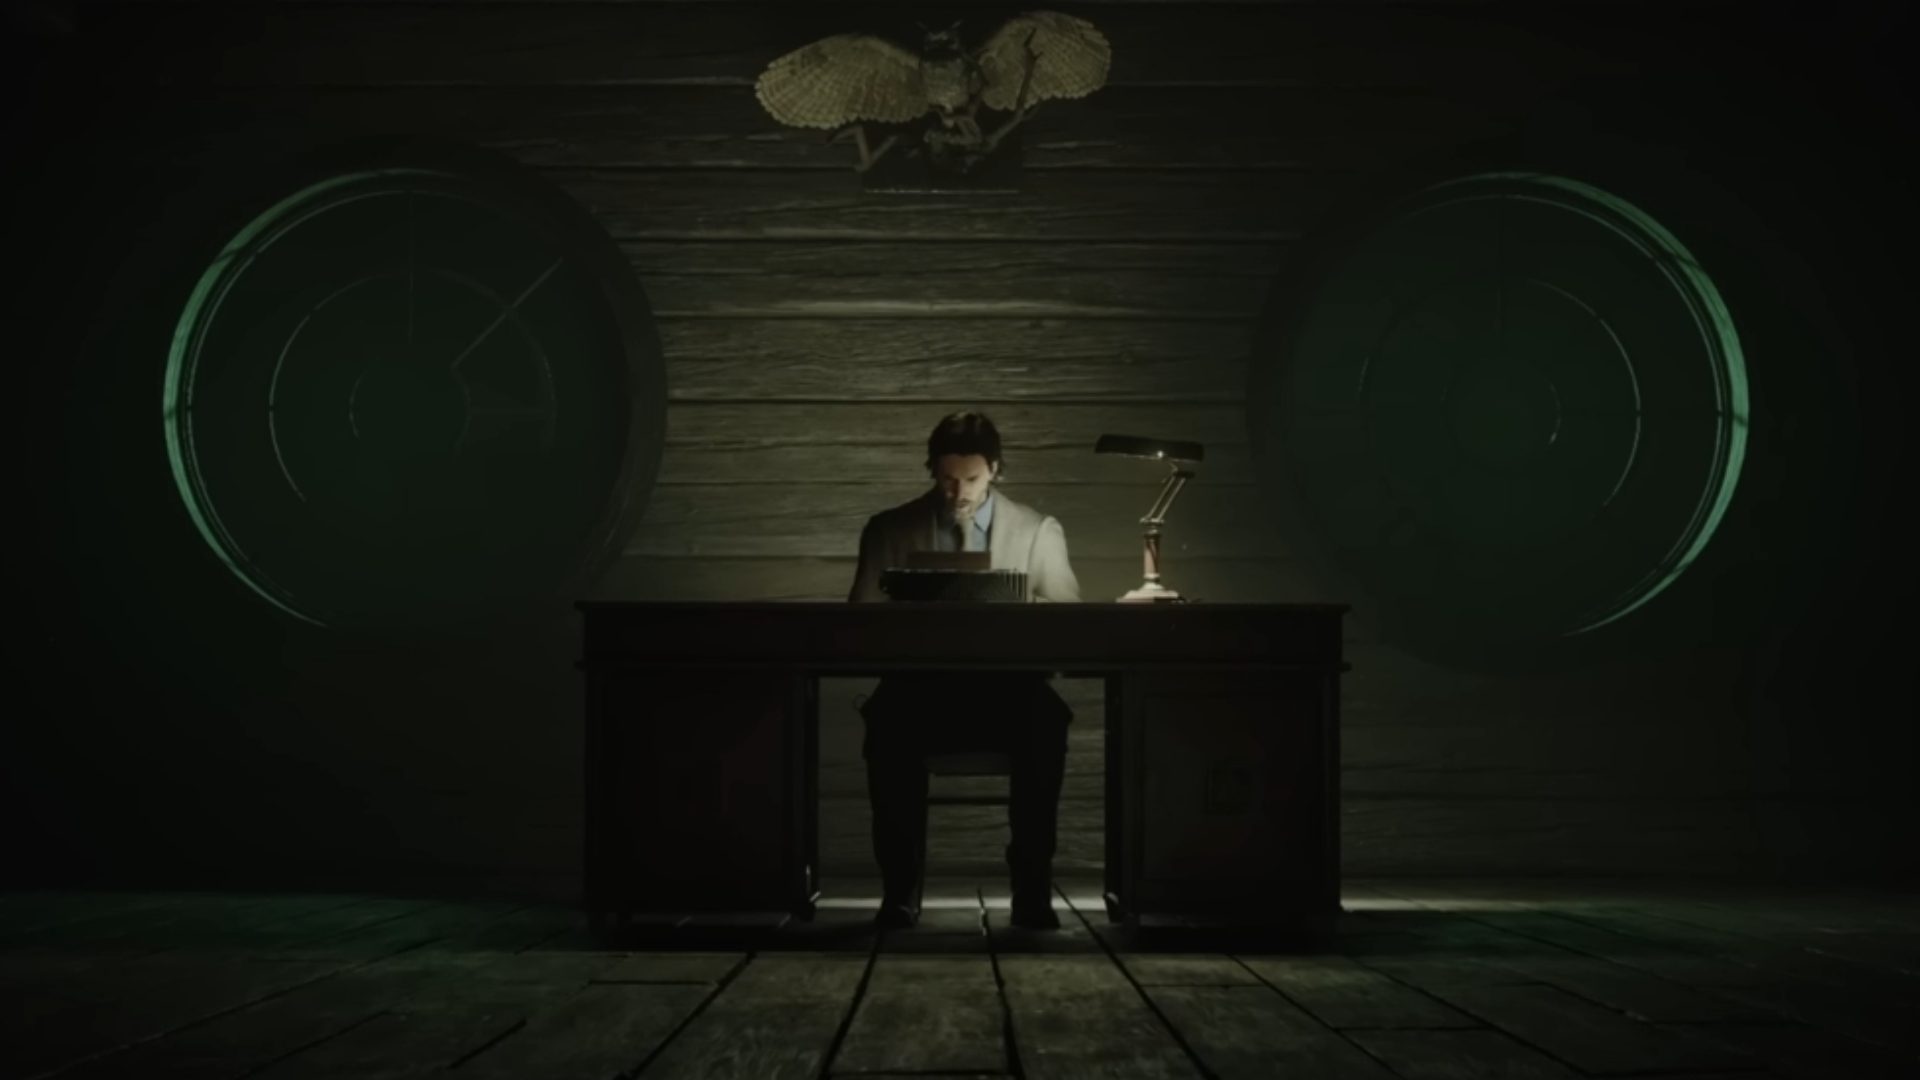 Alan Wake's American Nightmare may be coming to Steam - Polygon